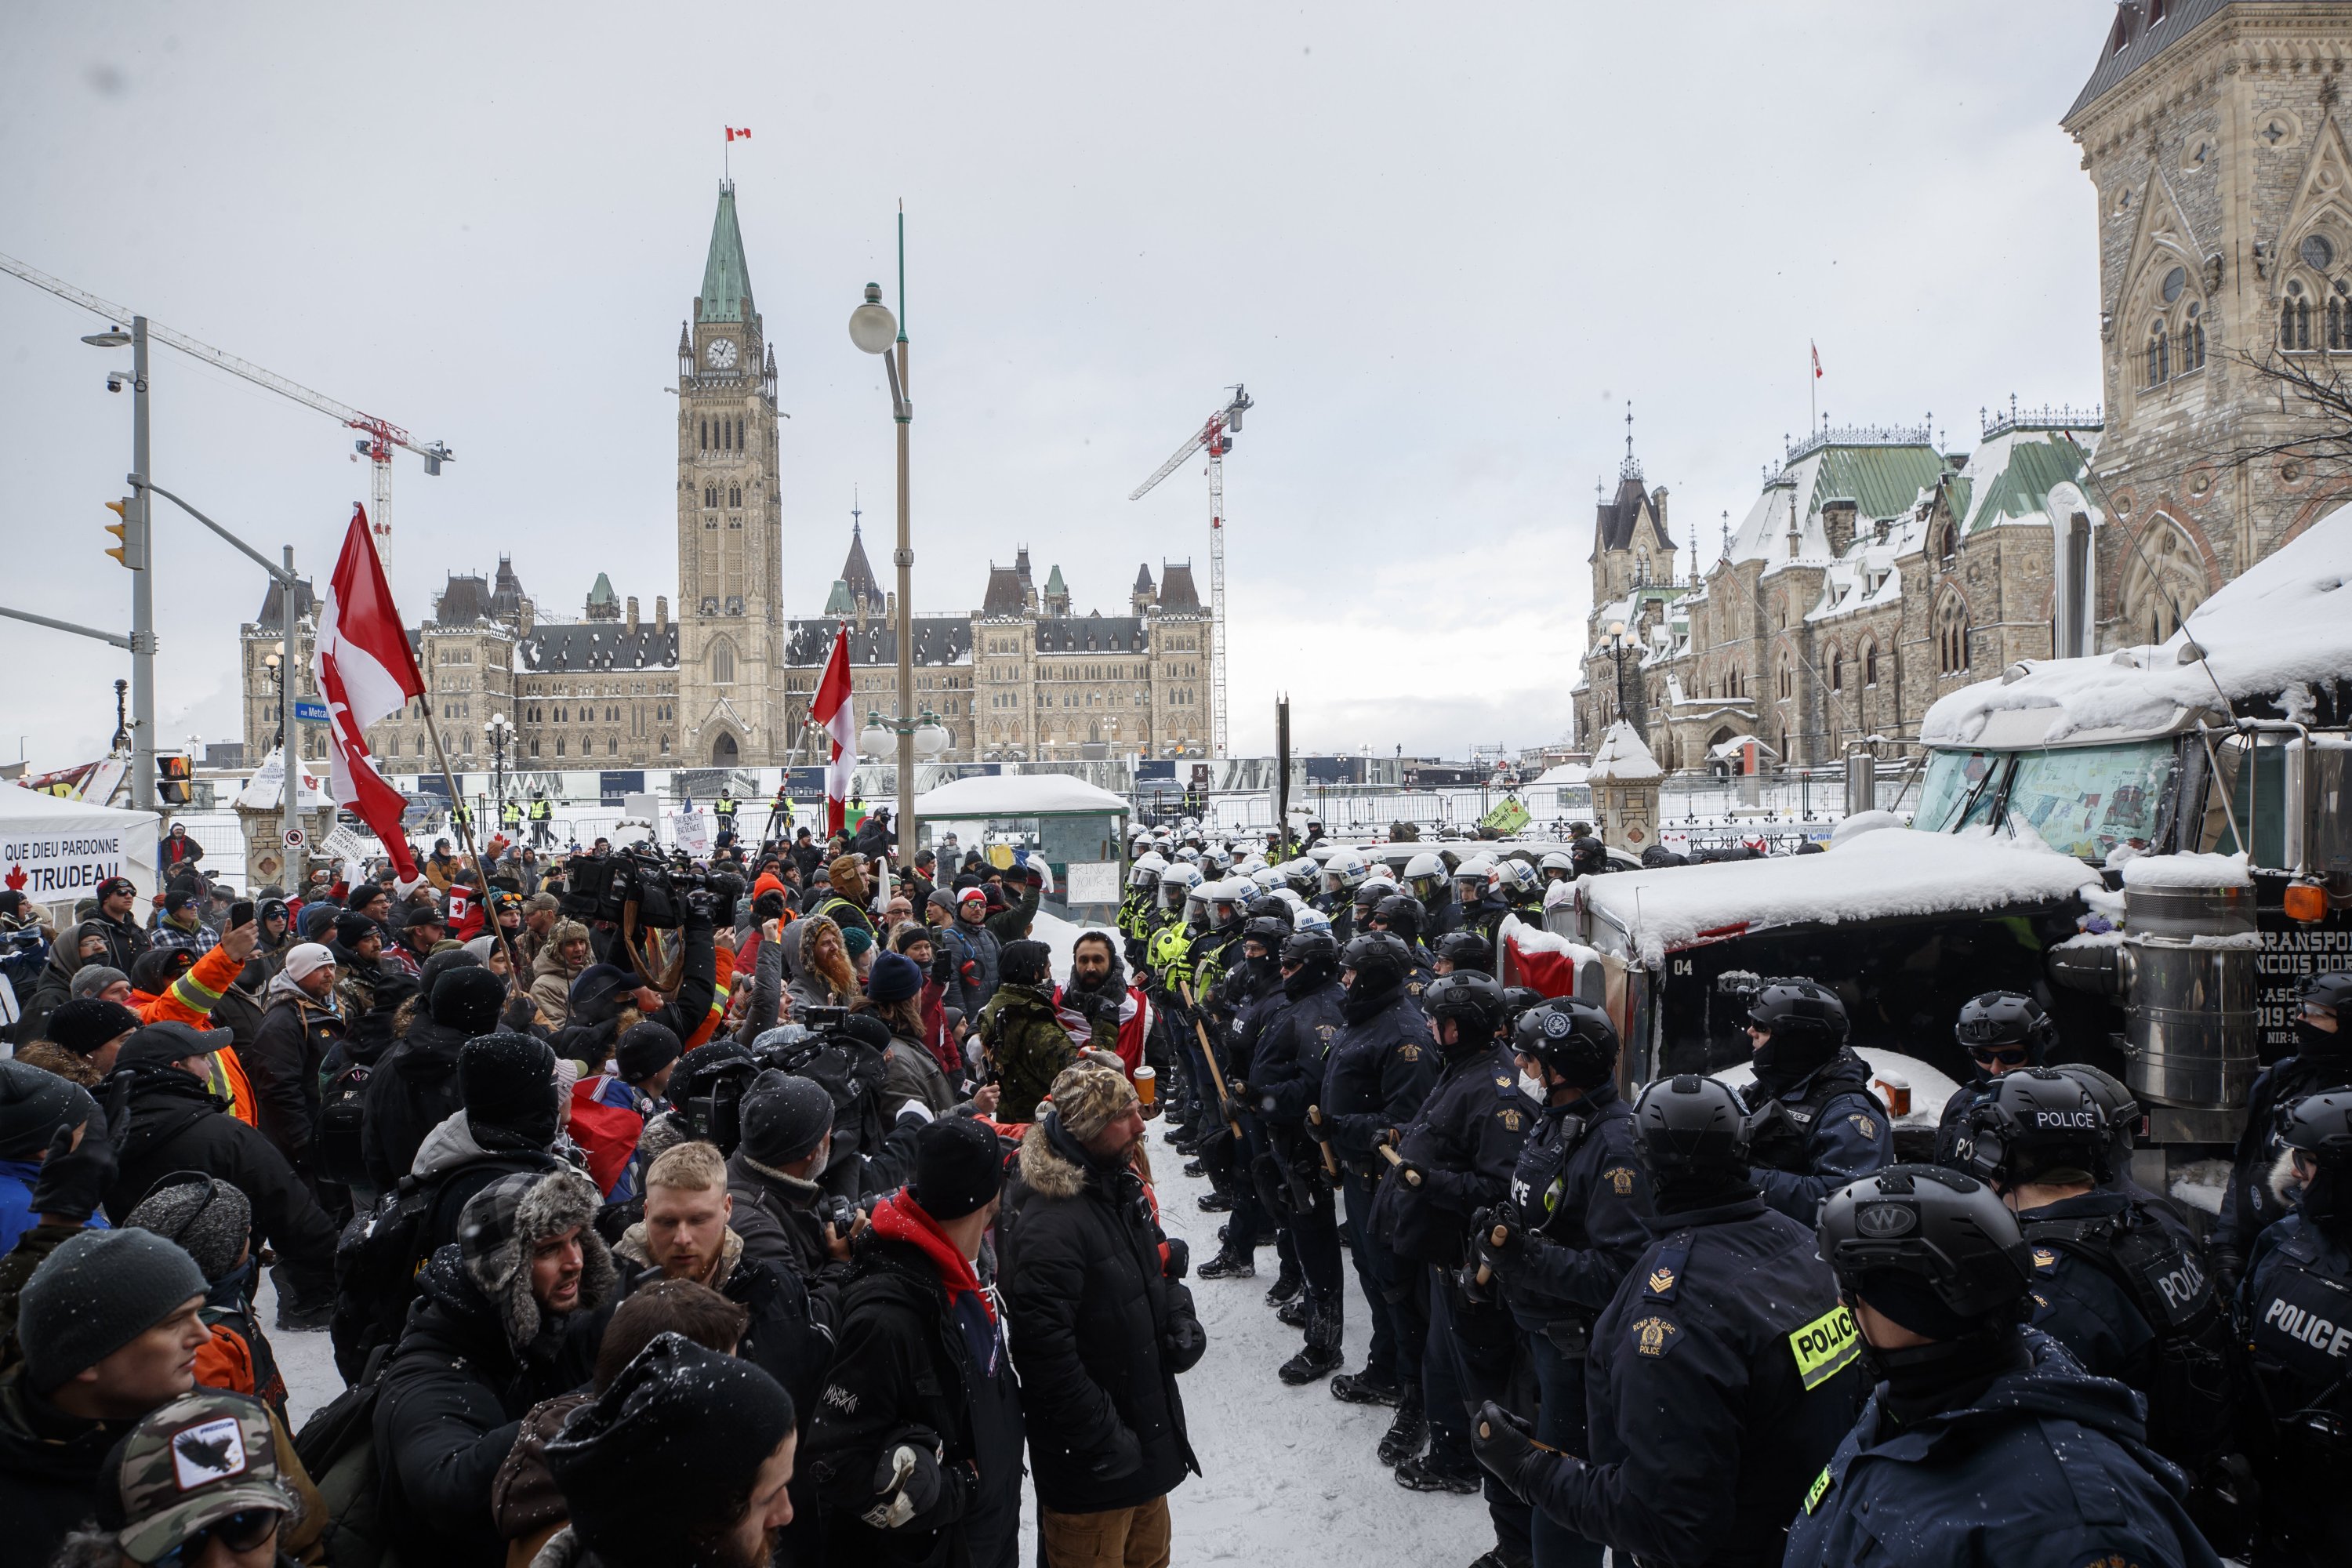 Police move in to clear protesters from downtown Ottawa near Parliament Hill, Canada, Feb. 19, 2022. (Cole Burston/The Canadian Press via AP)